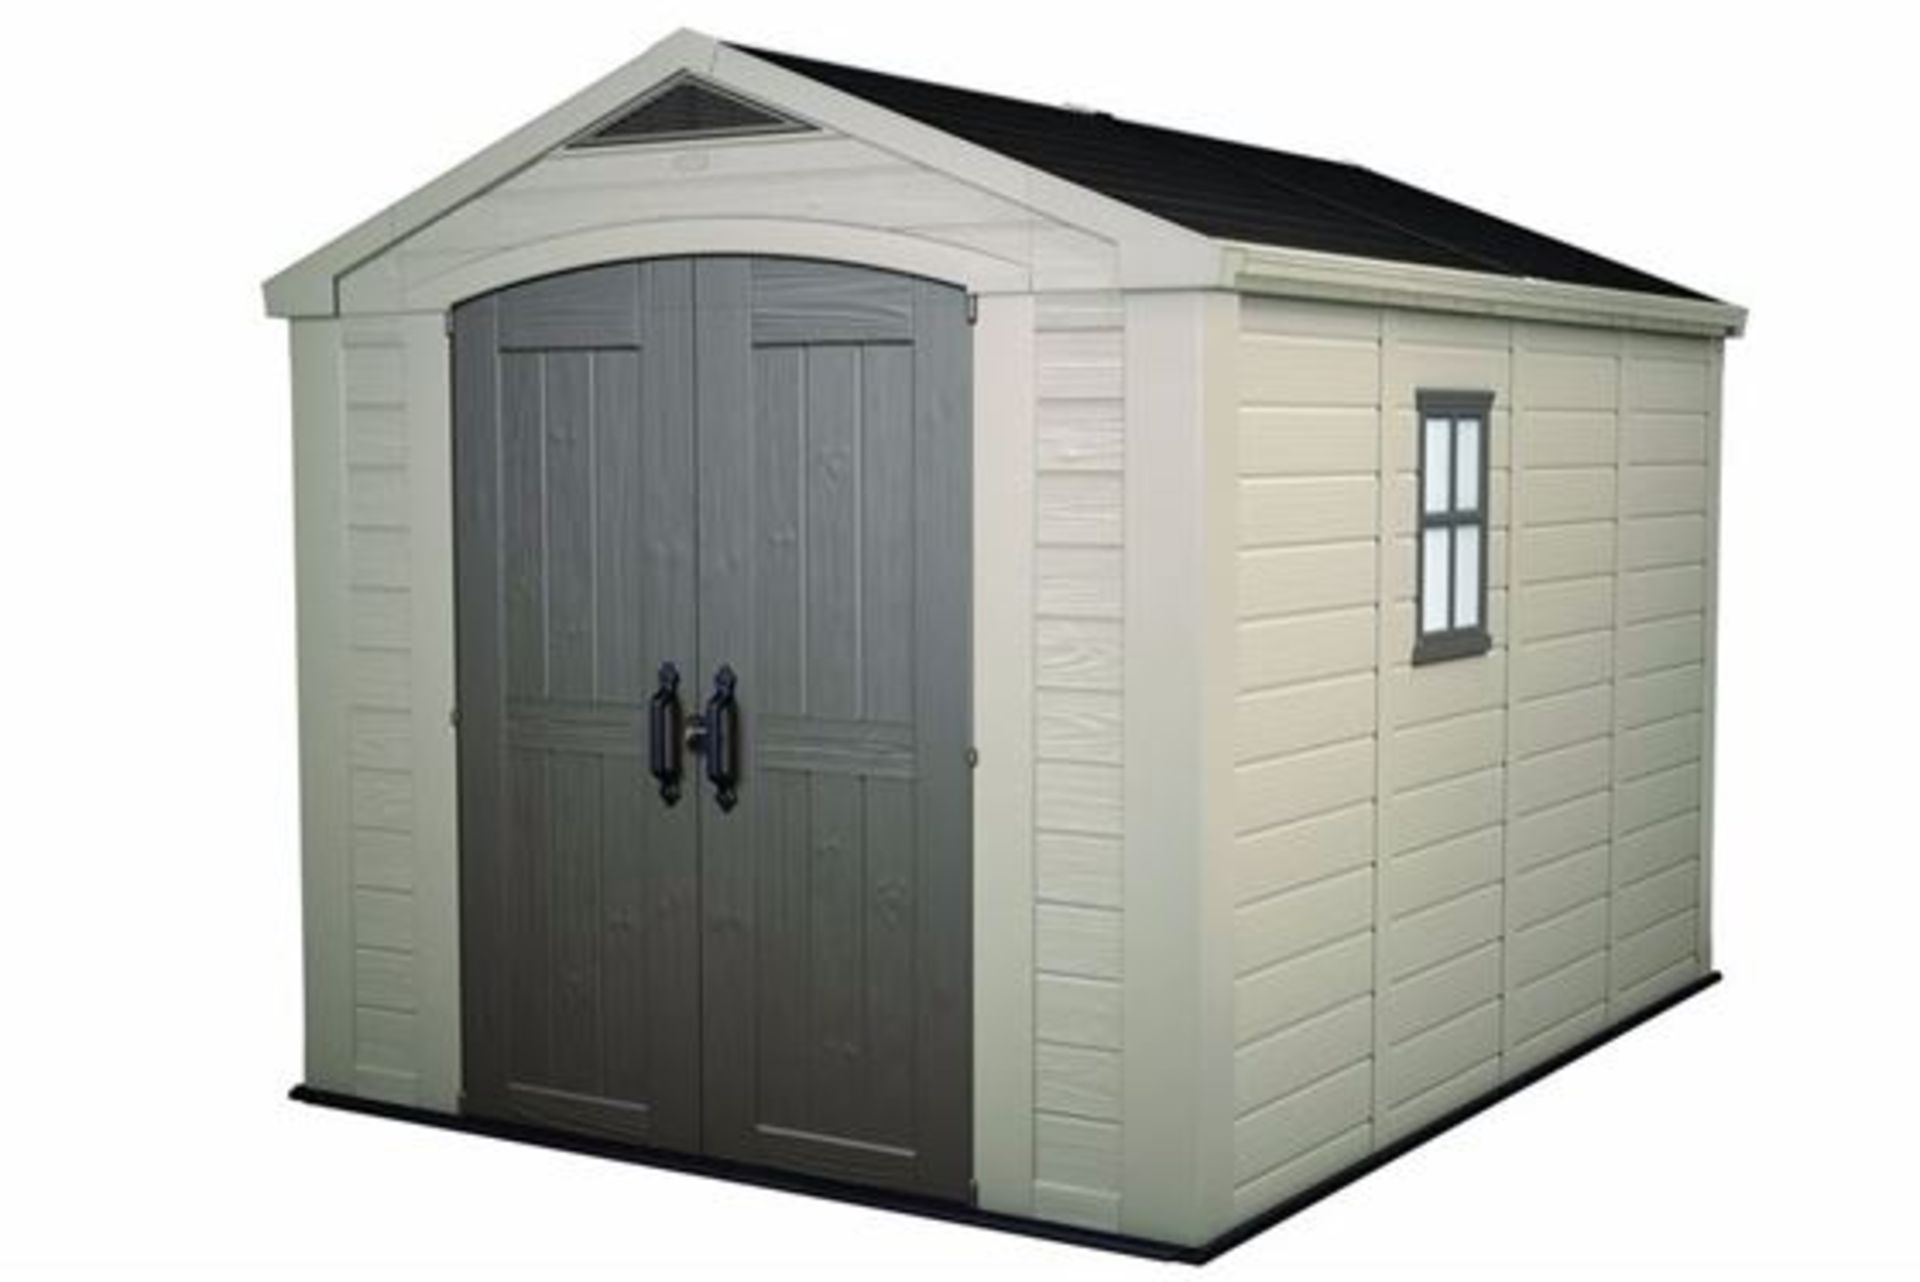 Brand new and boxed Keter Factor 8 x 11 shed - RRP £999